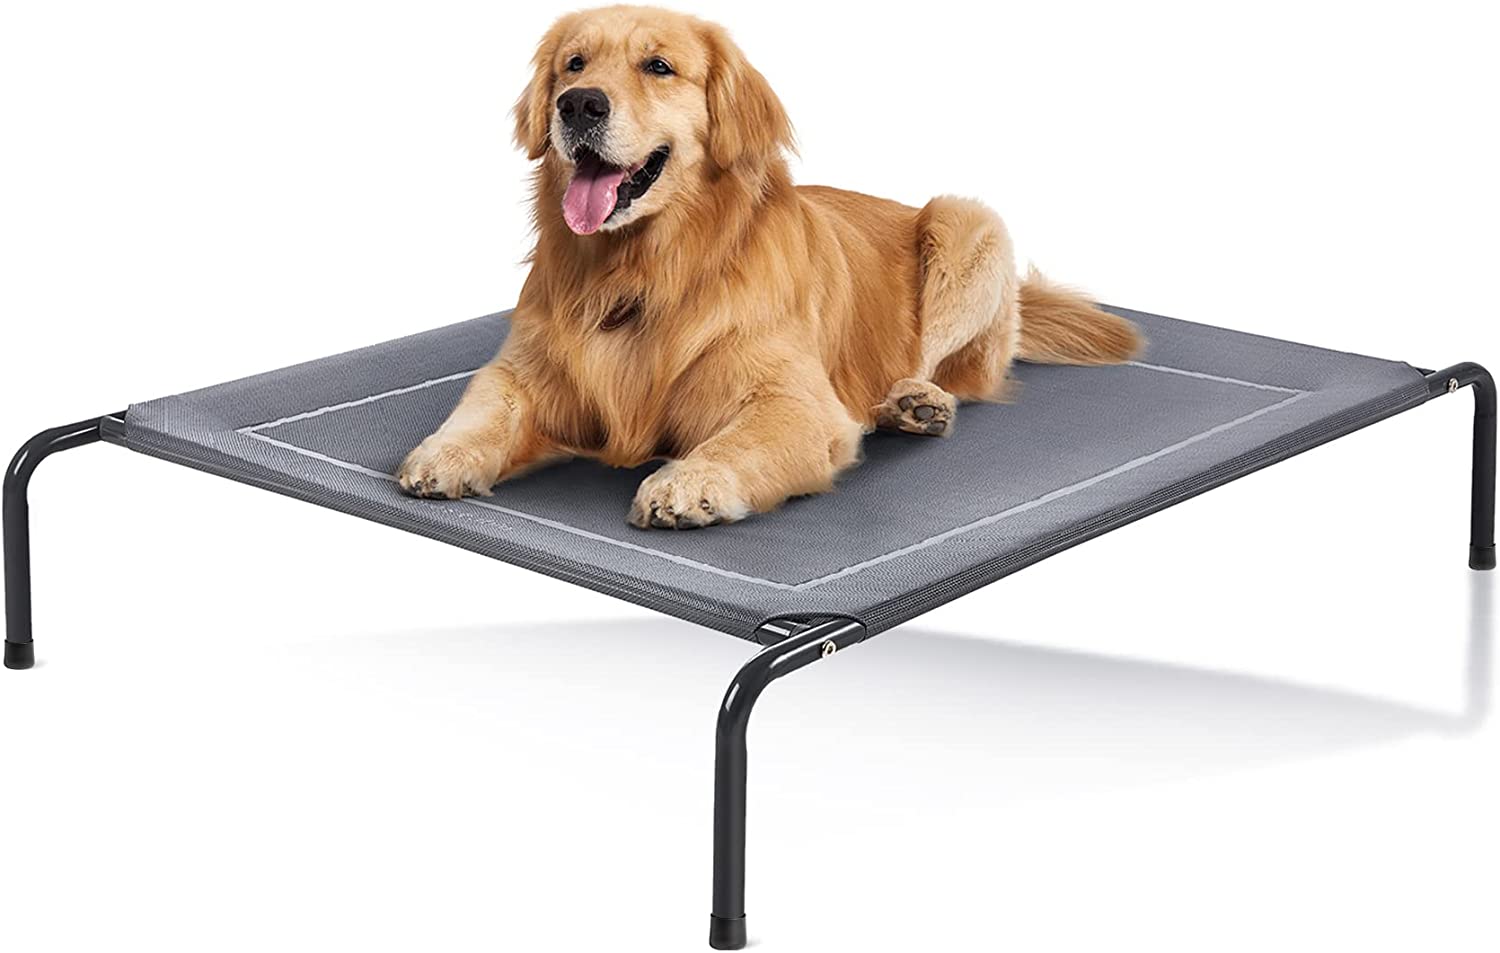 10. Love’s Cabin Outdoor Elevated Dog Bed